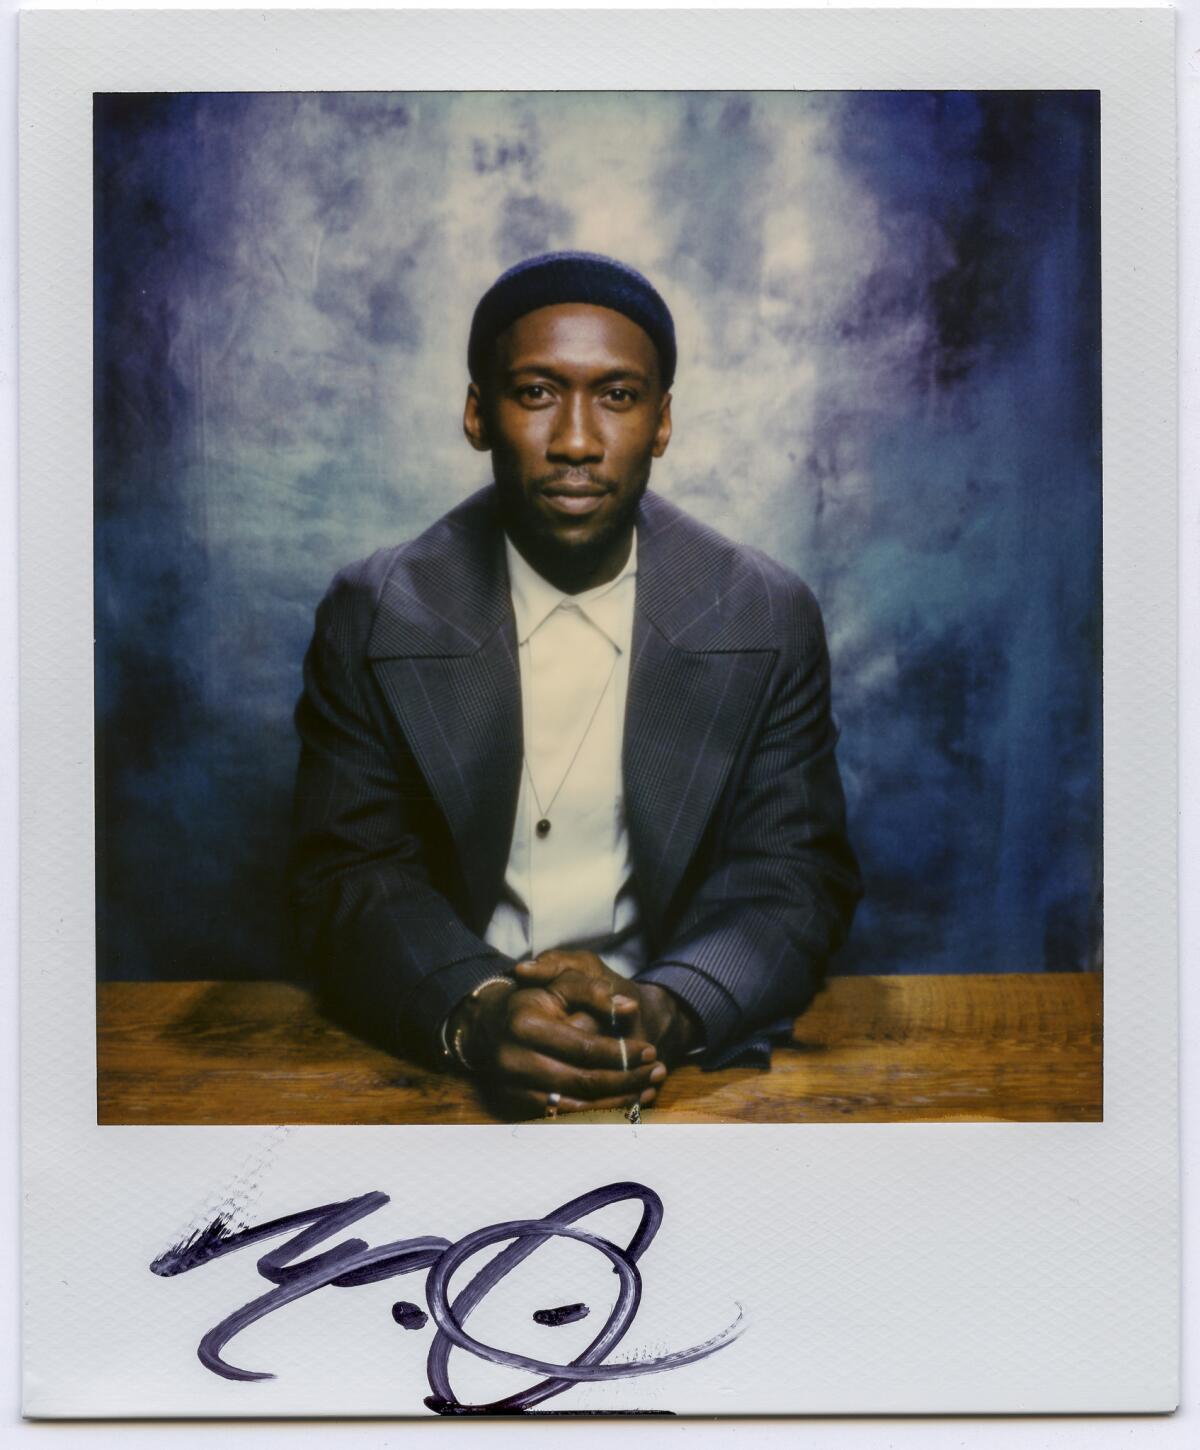 Mahershala Ali, from "Green Book," photographed in the L.A. Times Photo and Video Studio at the 2018 Toronto International Film Festival, in Toronto, Ont., Canada on September 10, 2018